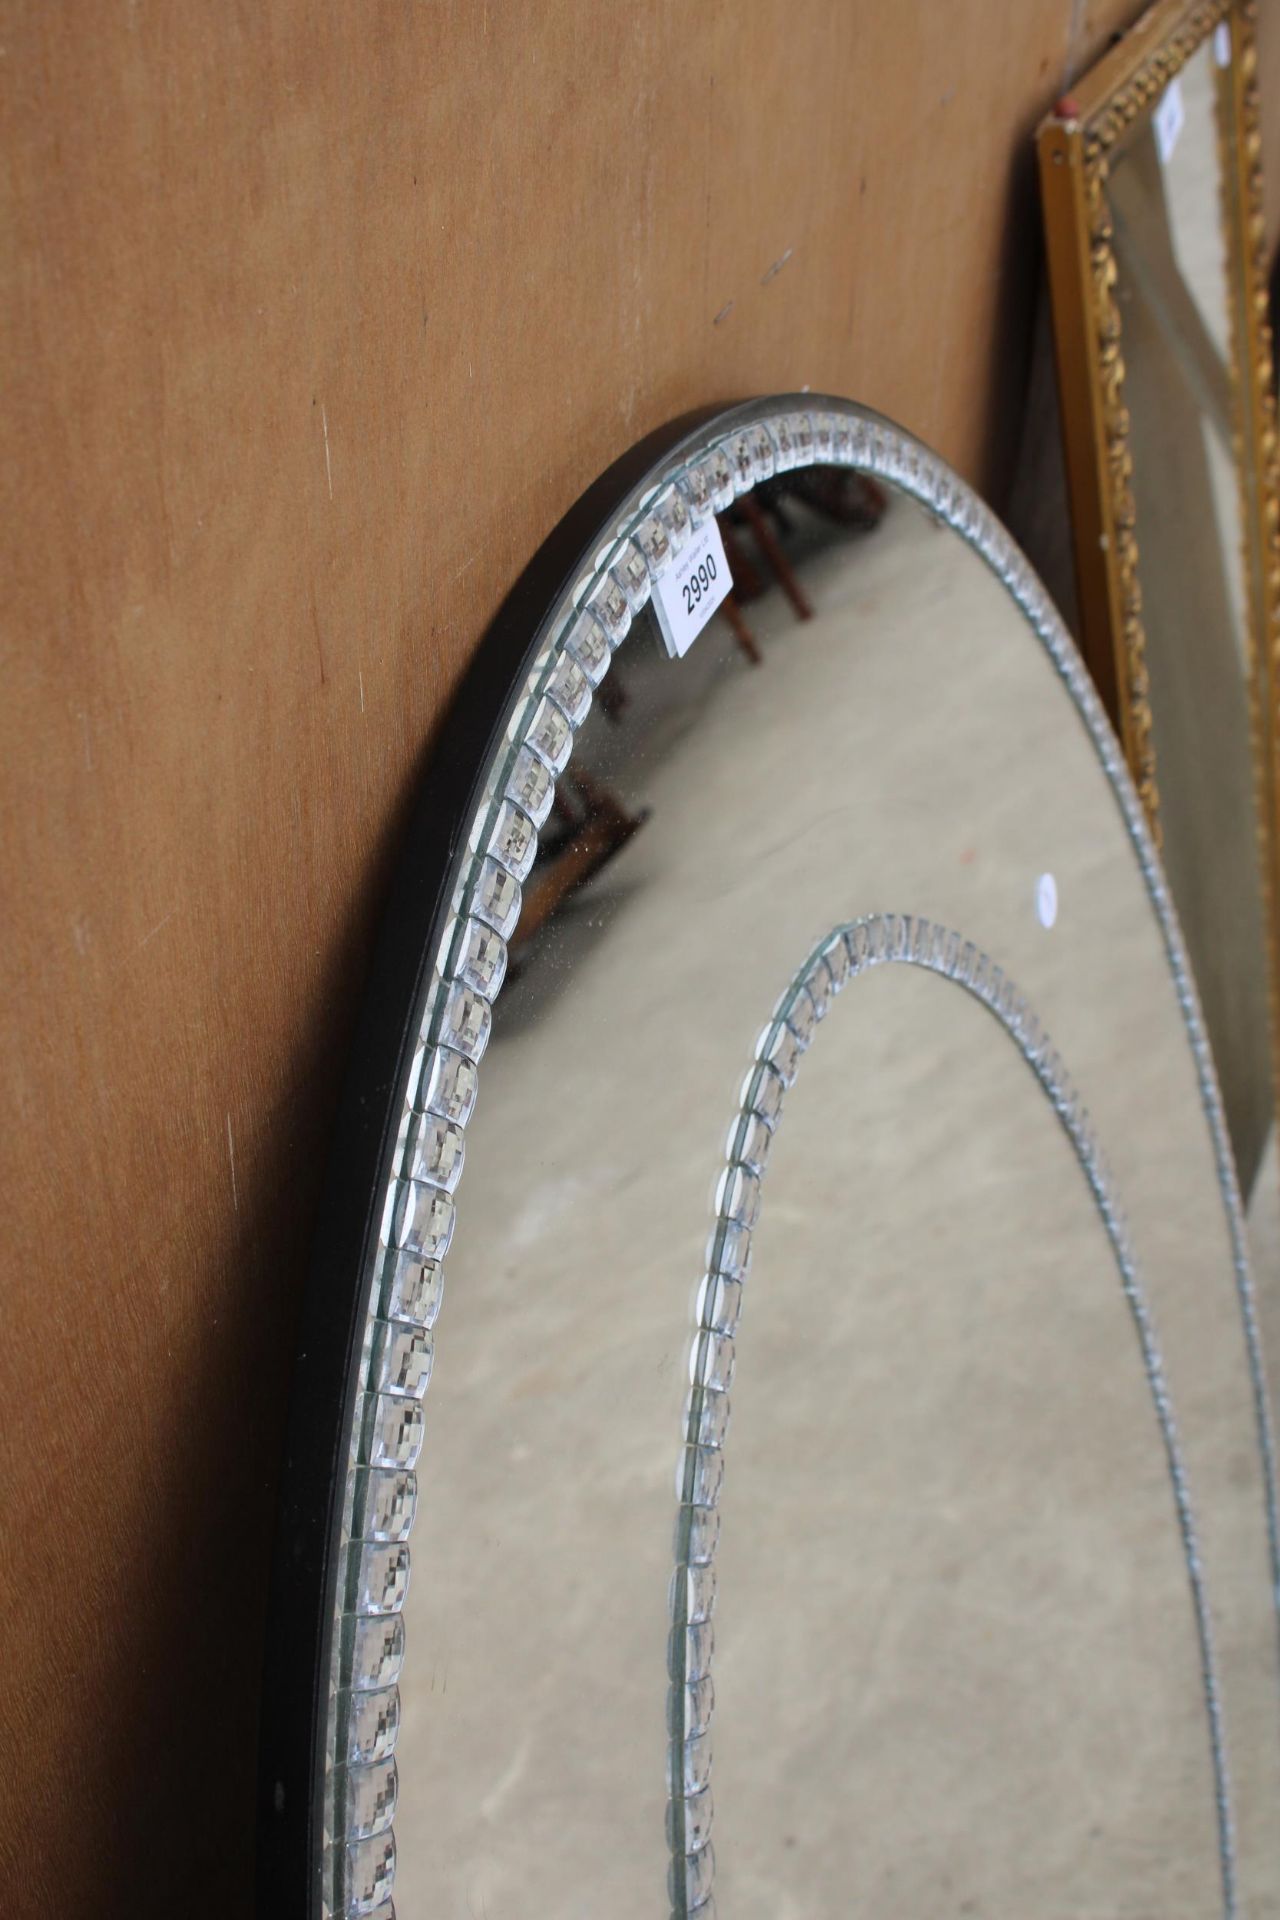 A MODERN OVAL MIRROR WITH TWO ROWS OF DIAMOND EFFECT DECORATIONS, 47" X 32" - Image 3 of 3